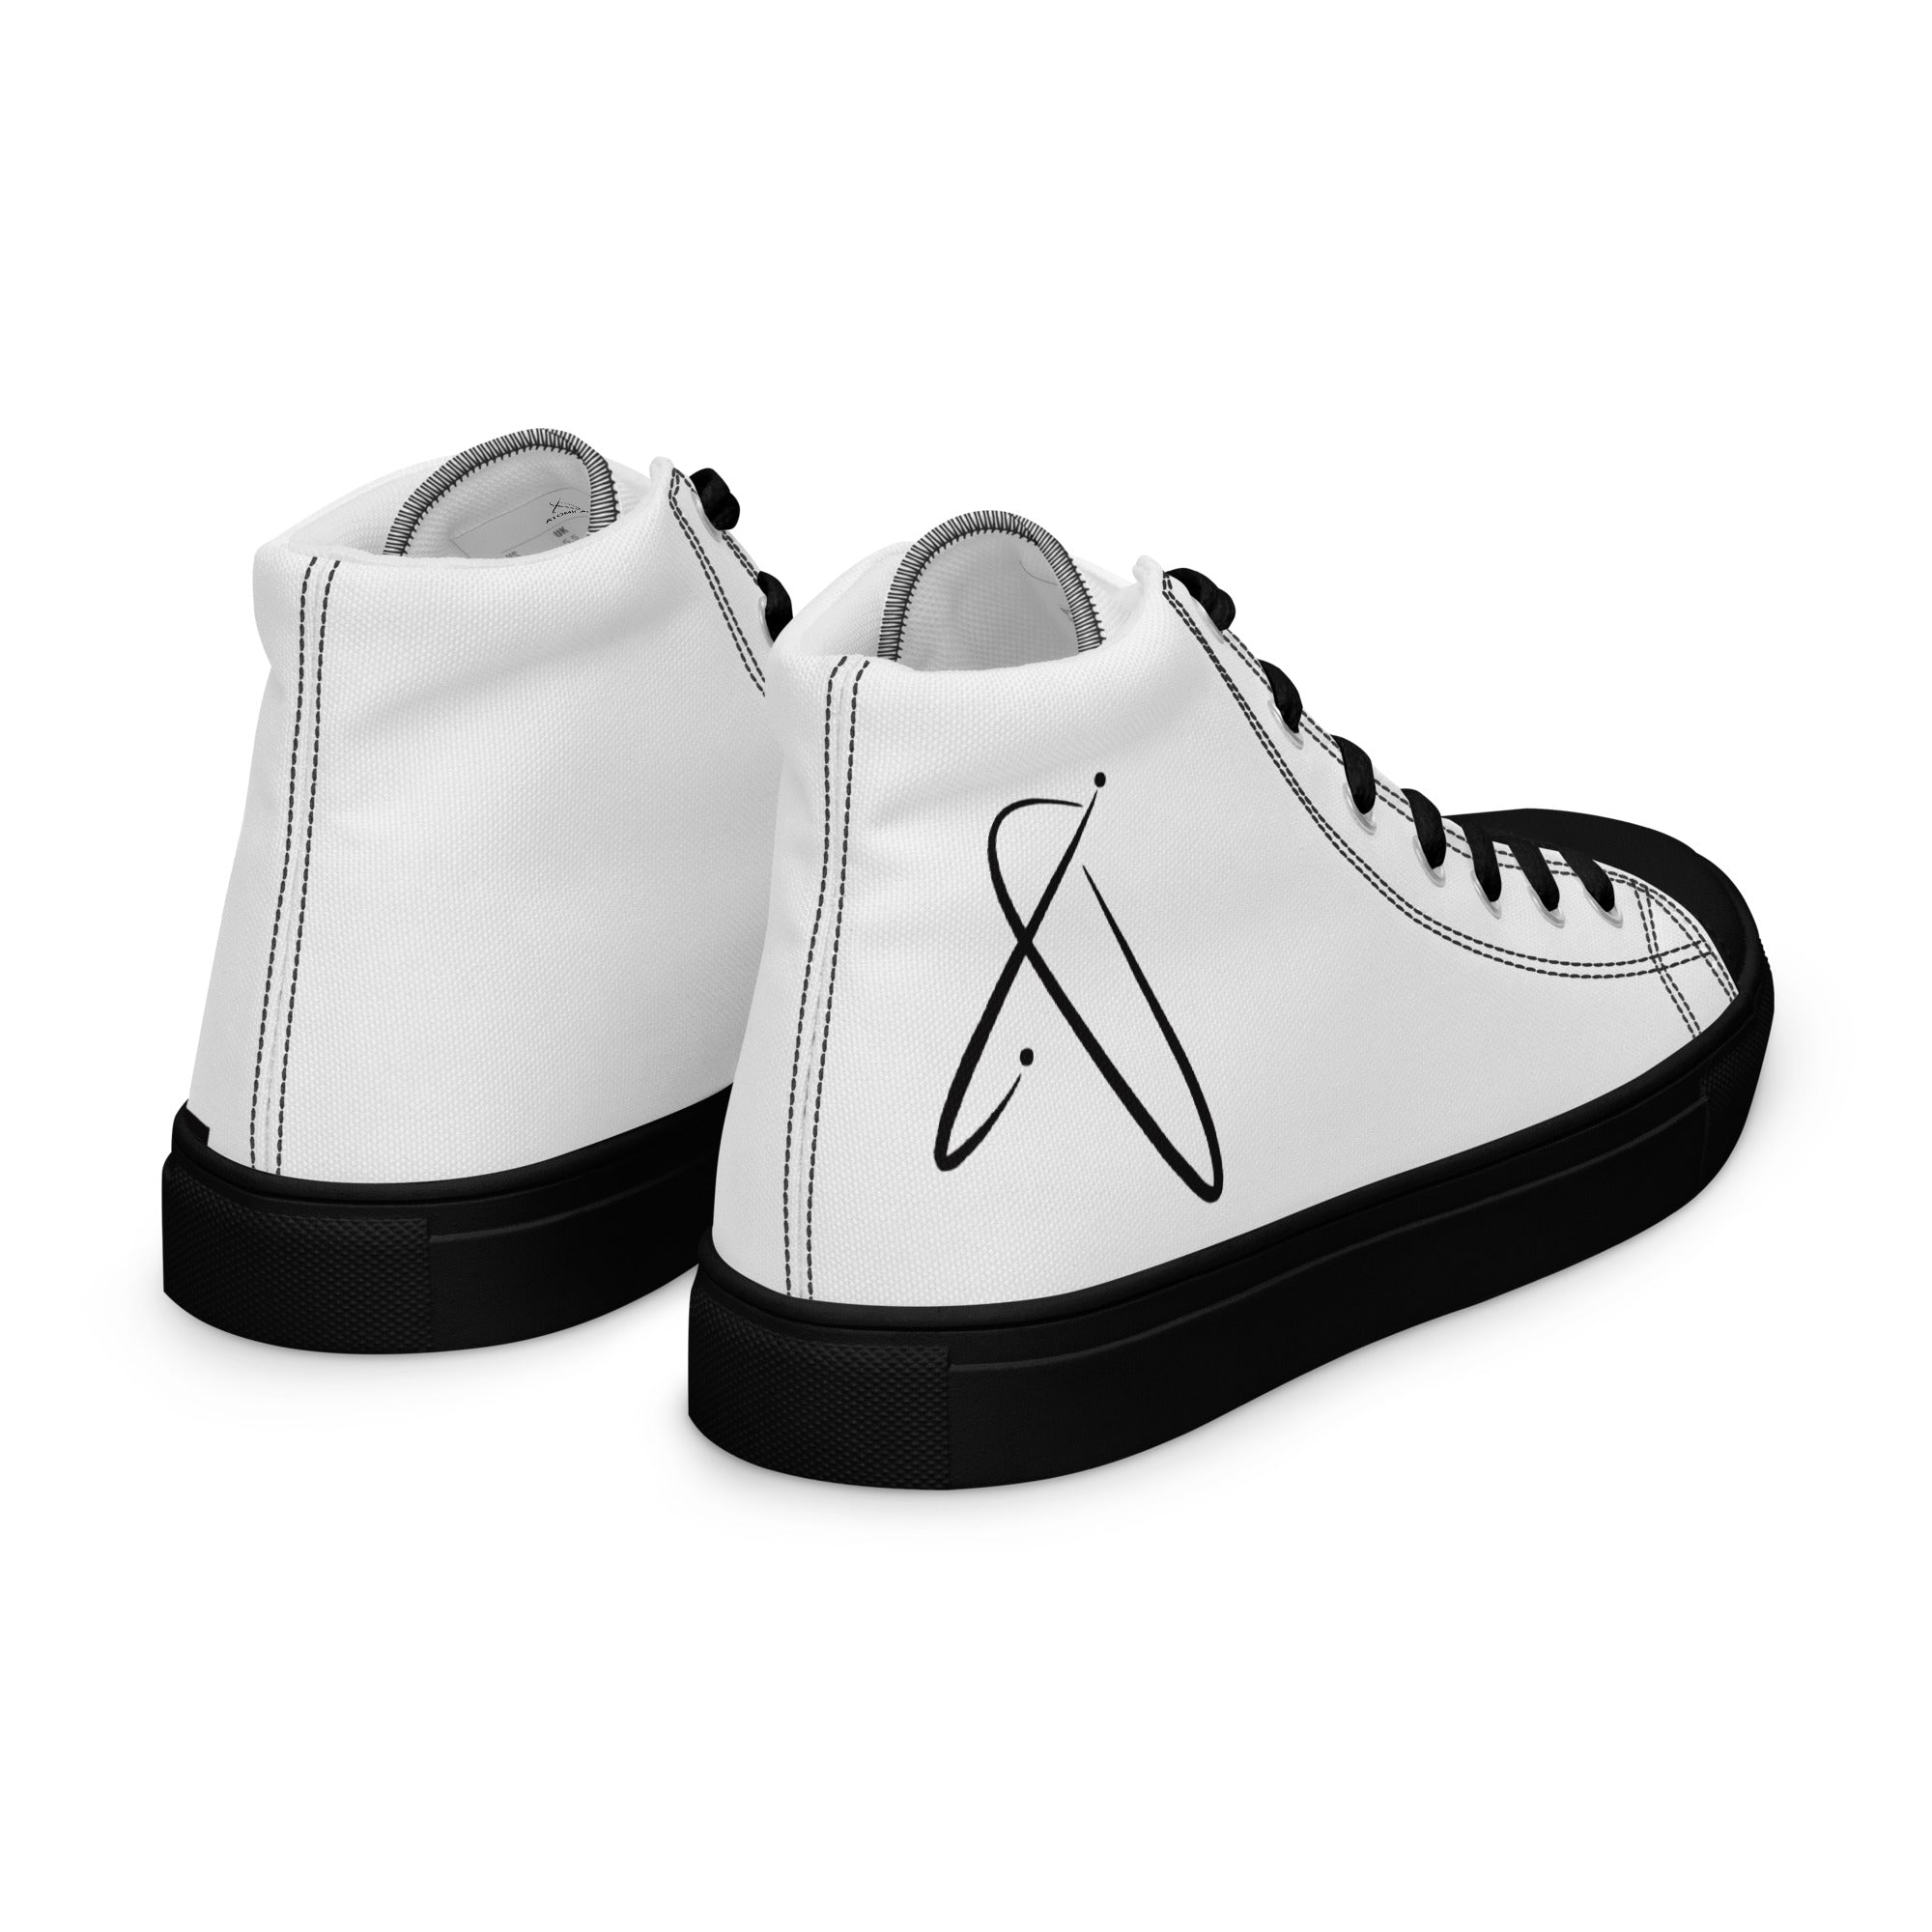 Atomical Women’s High-Top Canvas Shoes